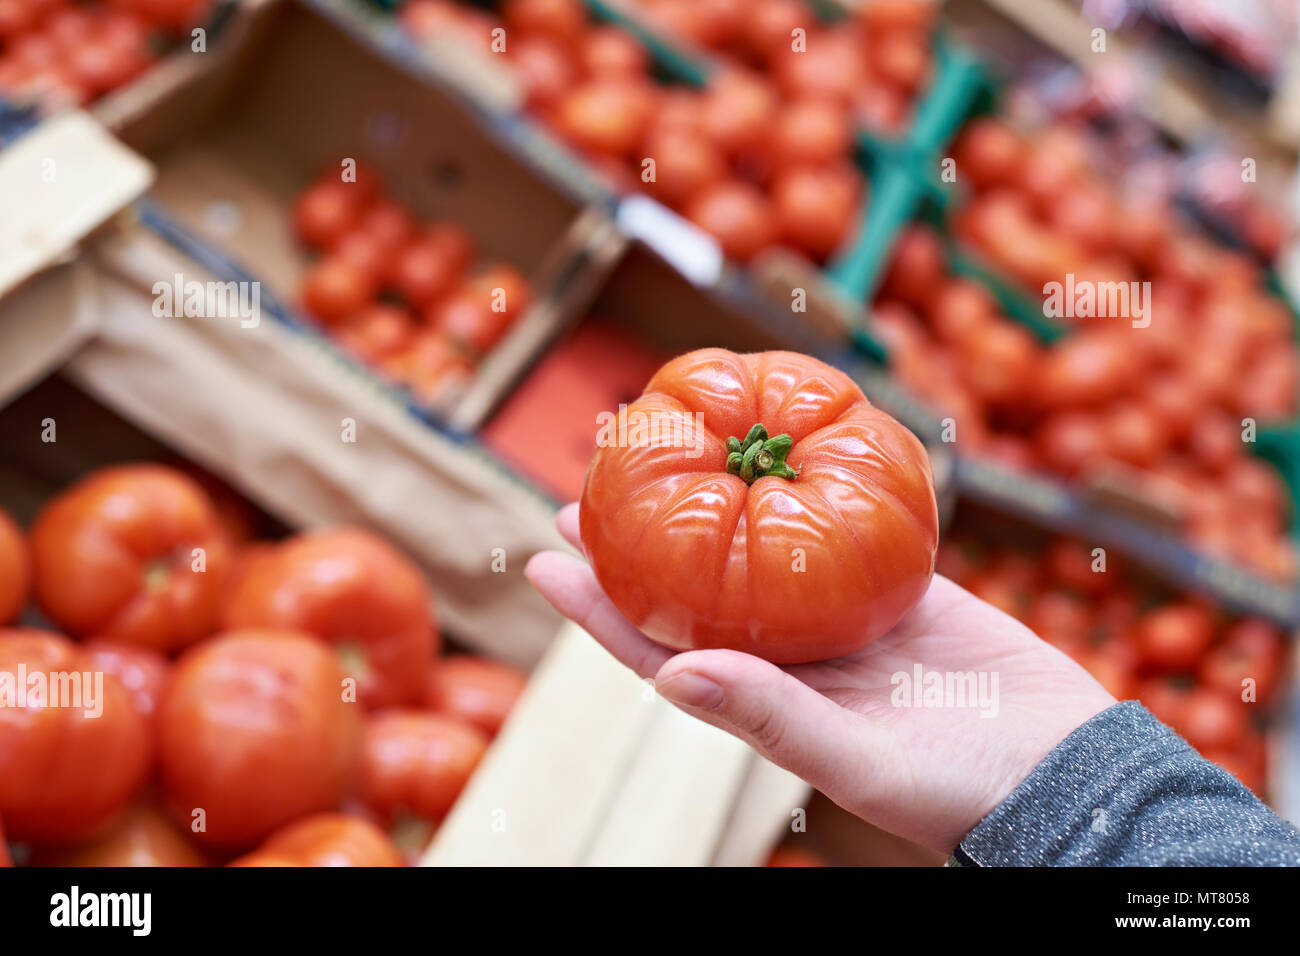 Tomato in the hand of the buyer at the grocery store Stock Photo